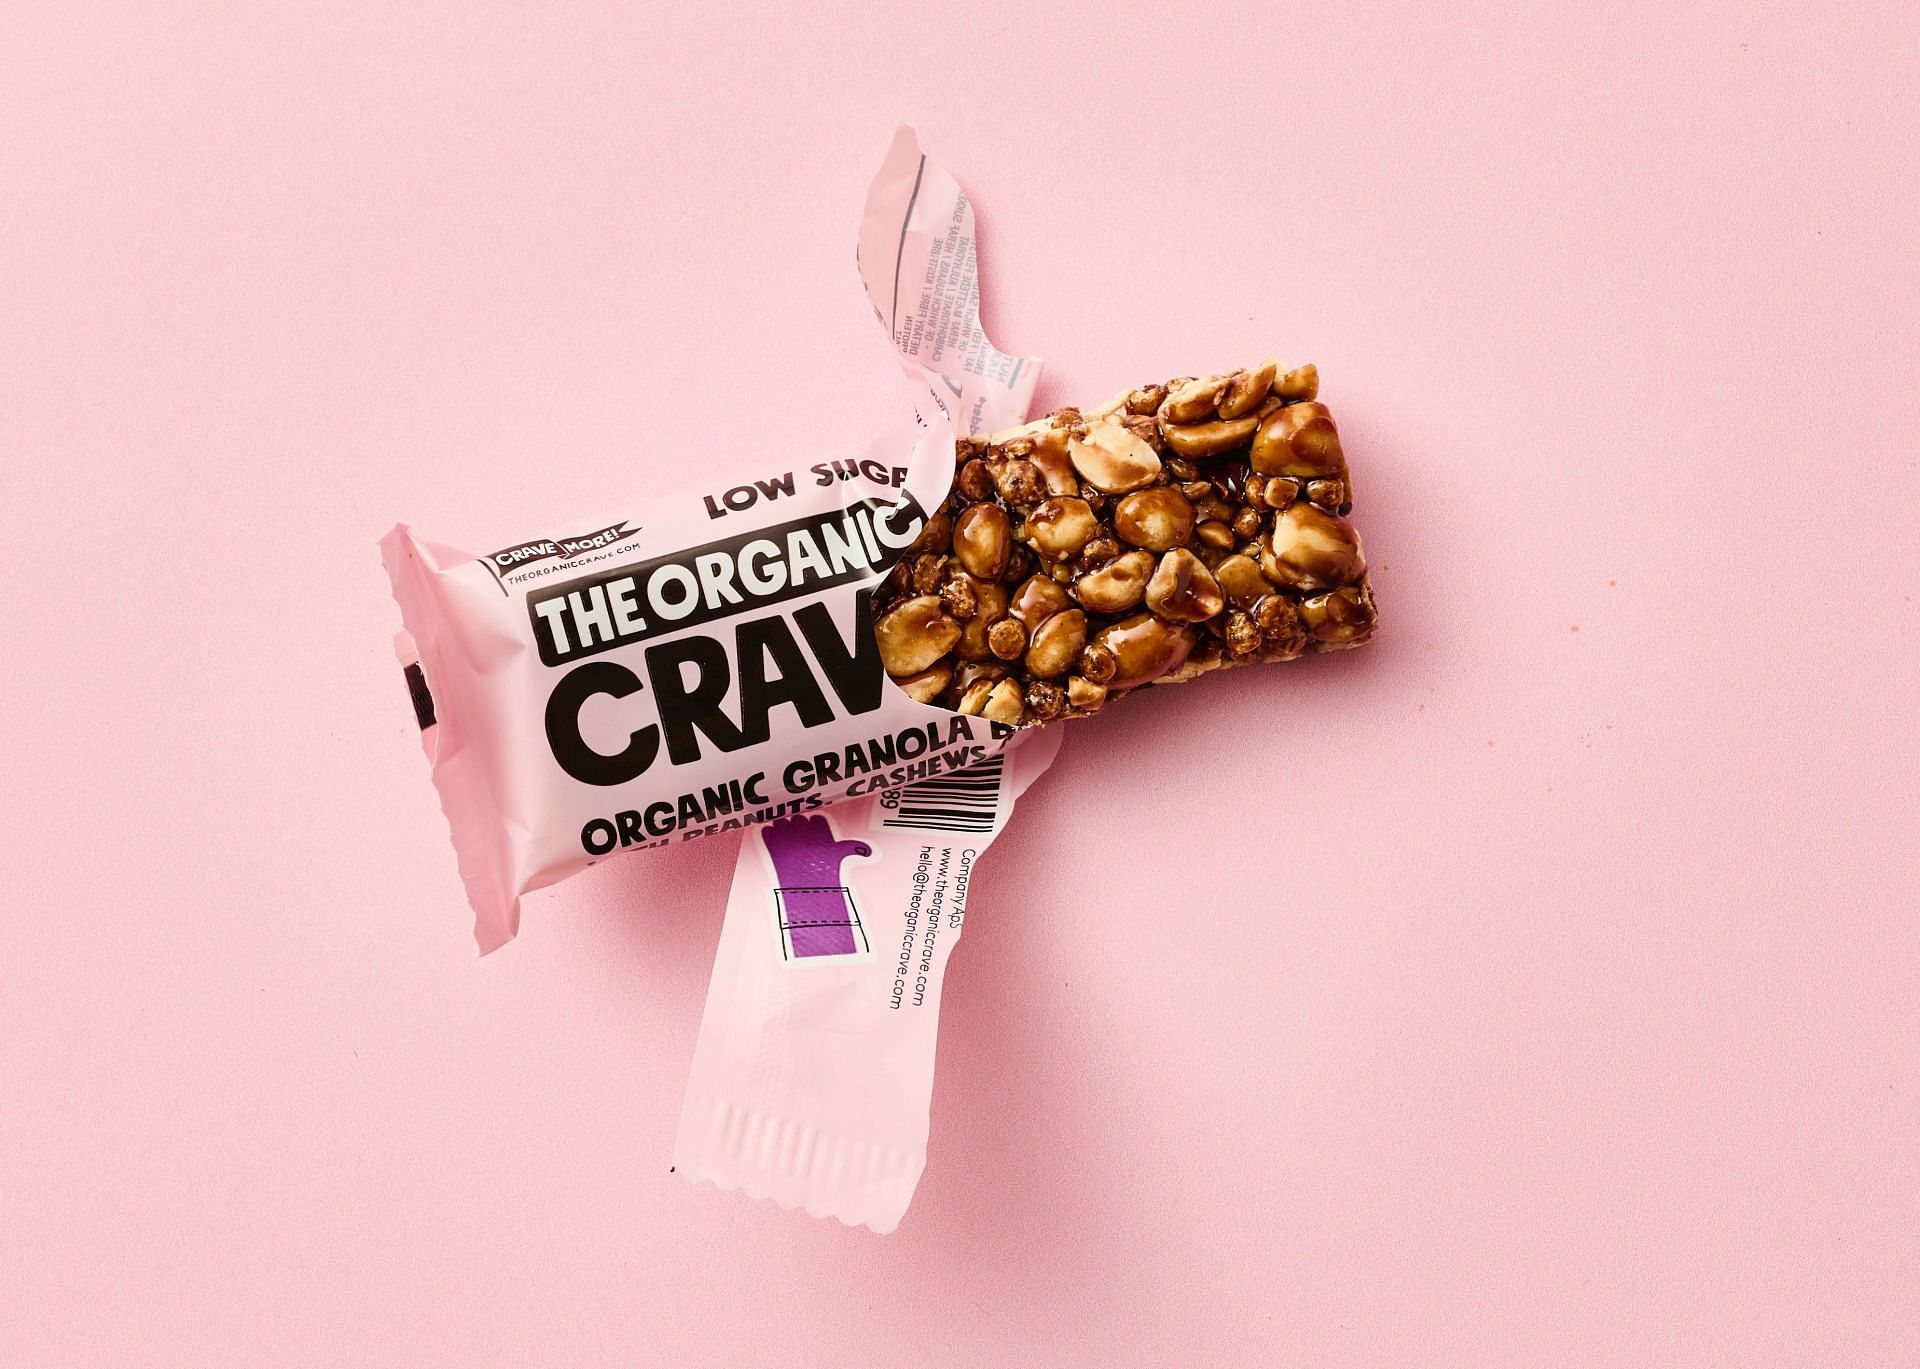 Low-sugar protein bars are one of the healthiest options for your diet! (Image via unsplash/The Organic Crave Company)